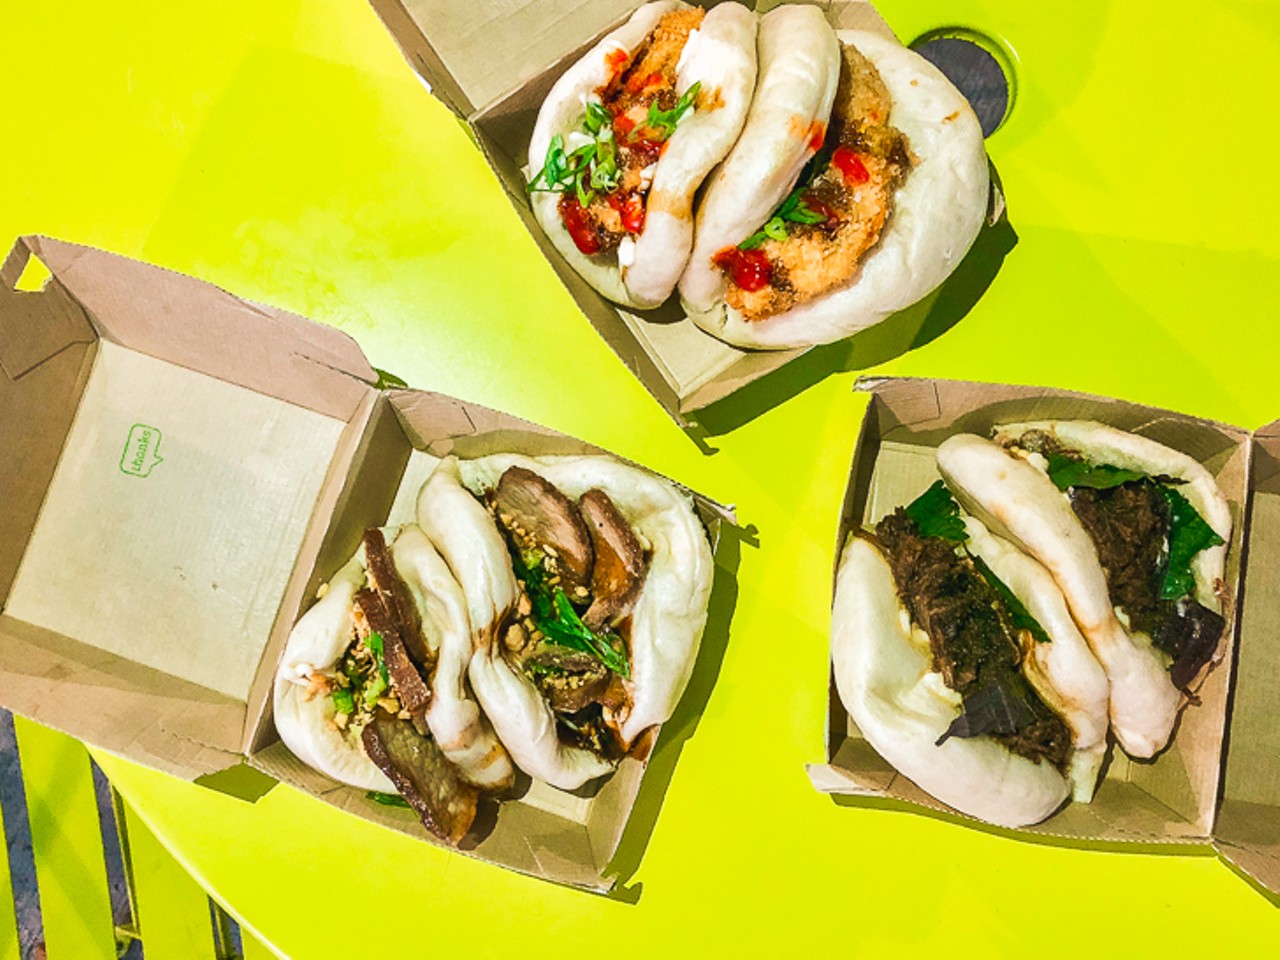 The menu offers three different steamed buns; pork, beef and veggie.